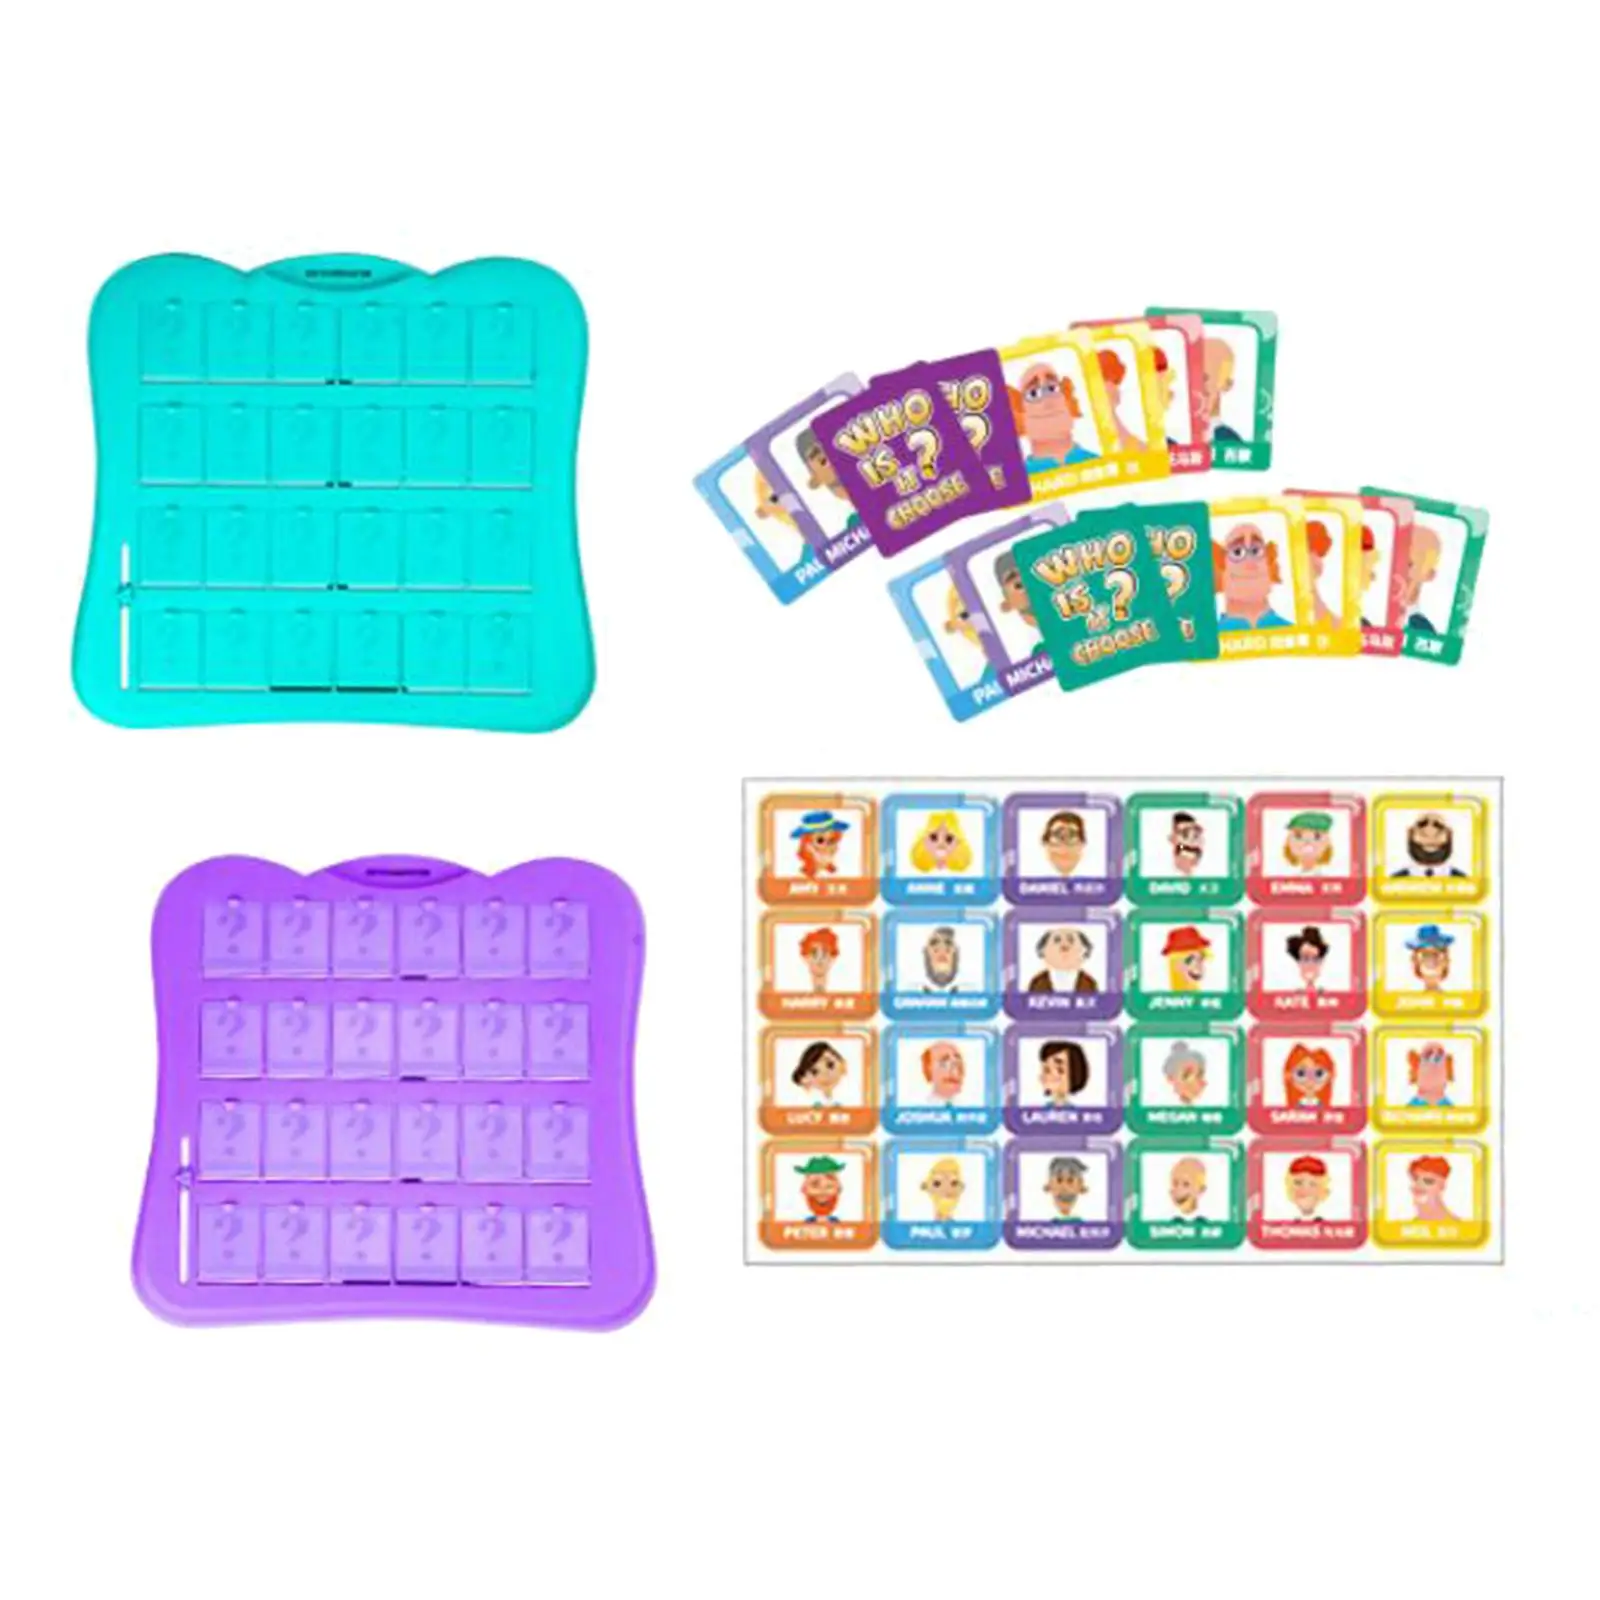 Guessing Who Game Fun Logical Reasoning Abilities Puzzle Game Family Board Game for Children Boys Gifts Travel Games Family Game